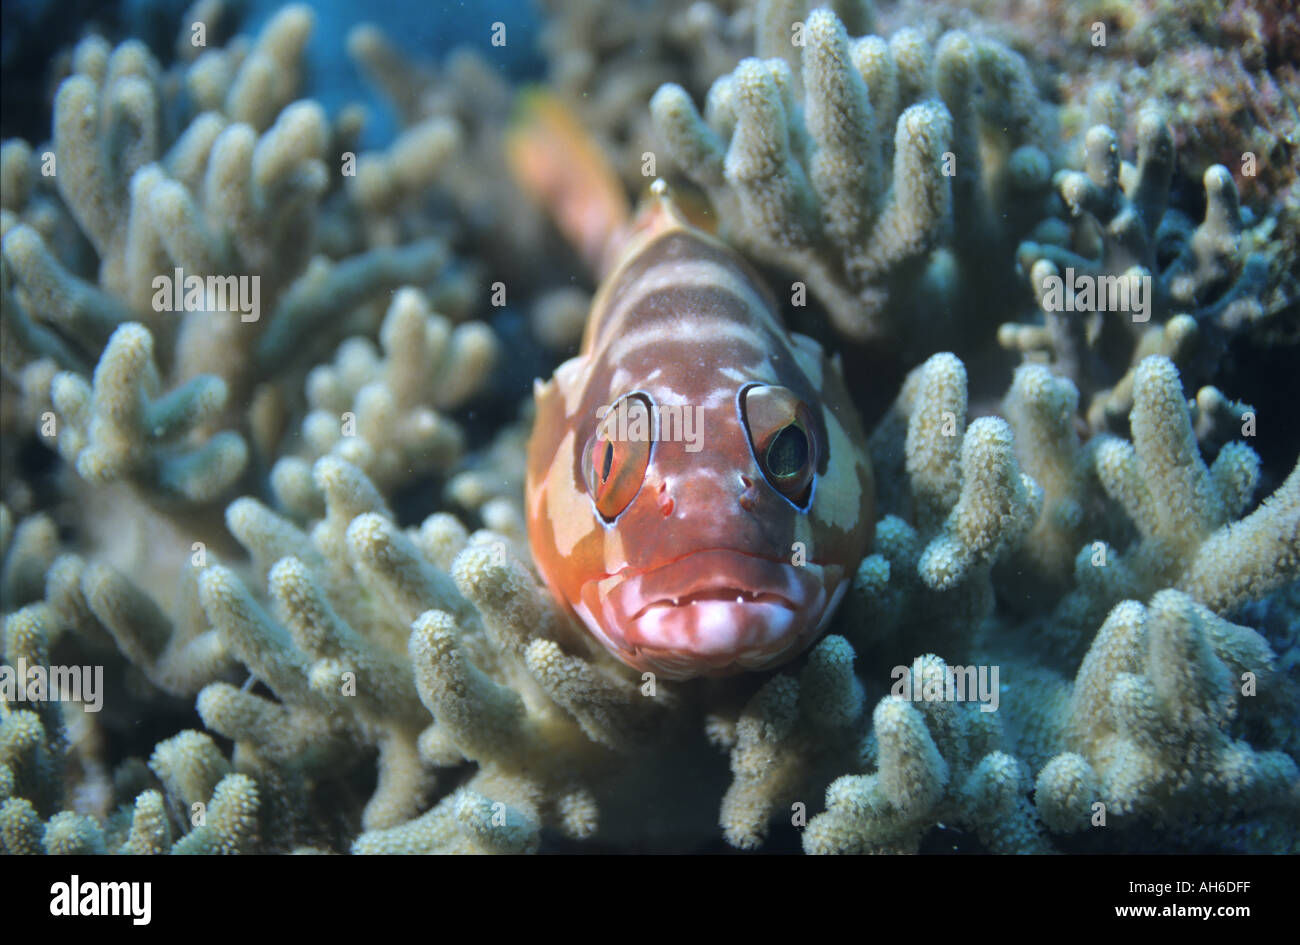 New Caledonia Noumea Lagoon Red Fish Lying On A Table Coral Stock Photo